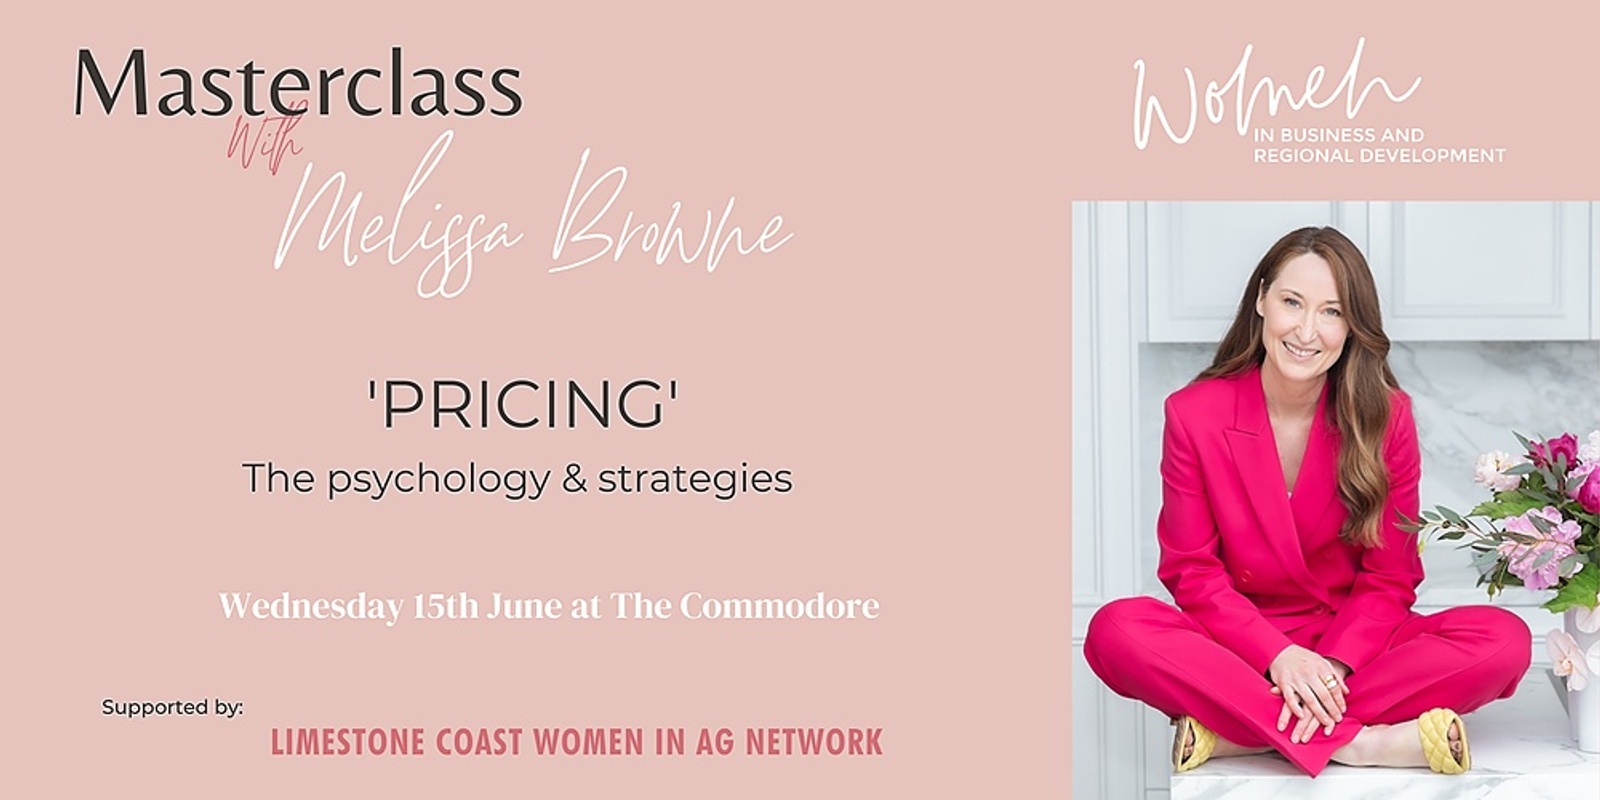 WiBRD MasterClass: 'PRICING' - The psychology & strategies ~ with Melissa Browne